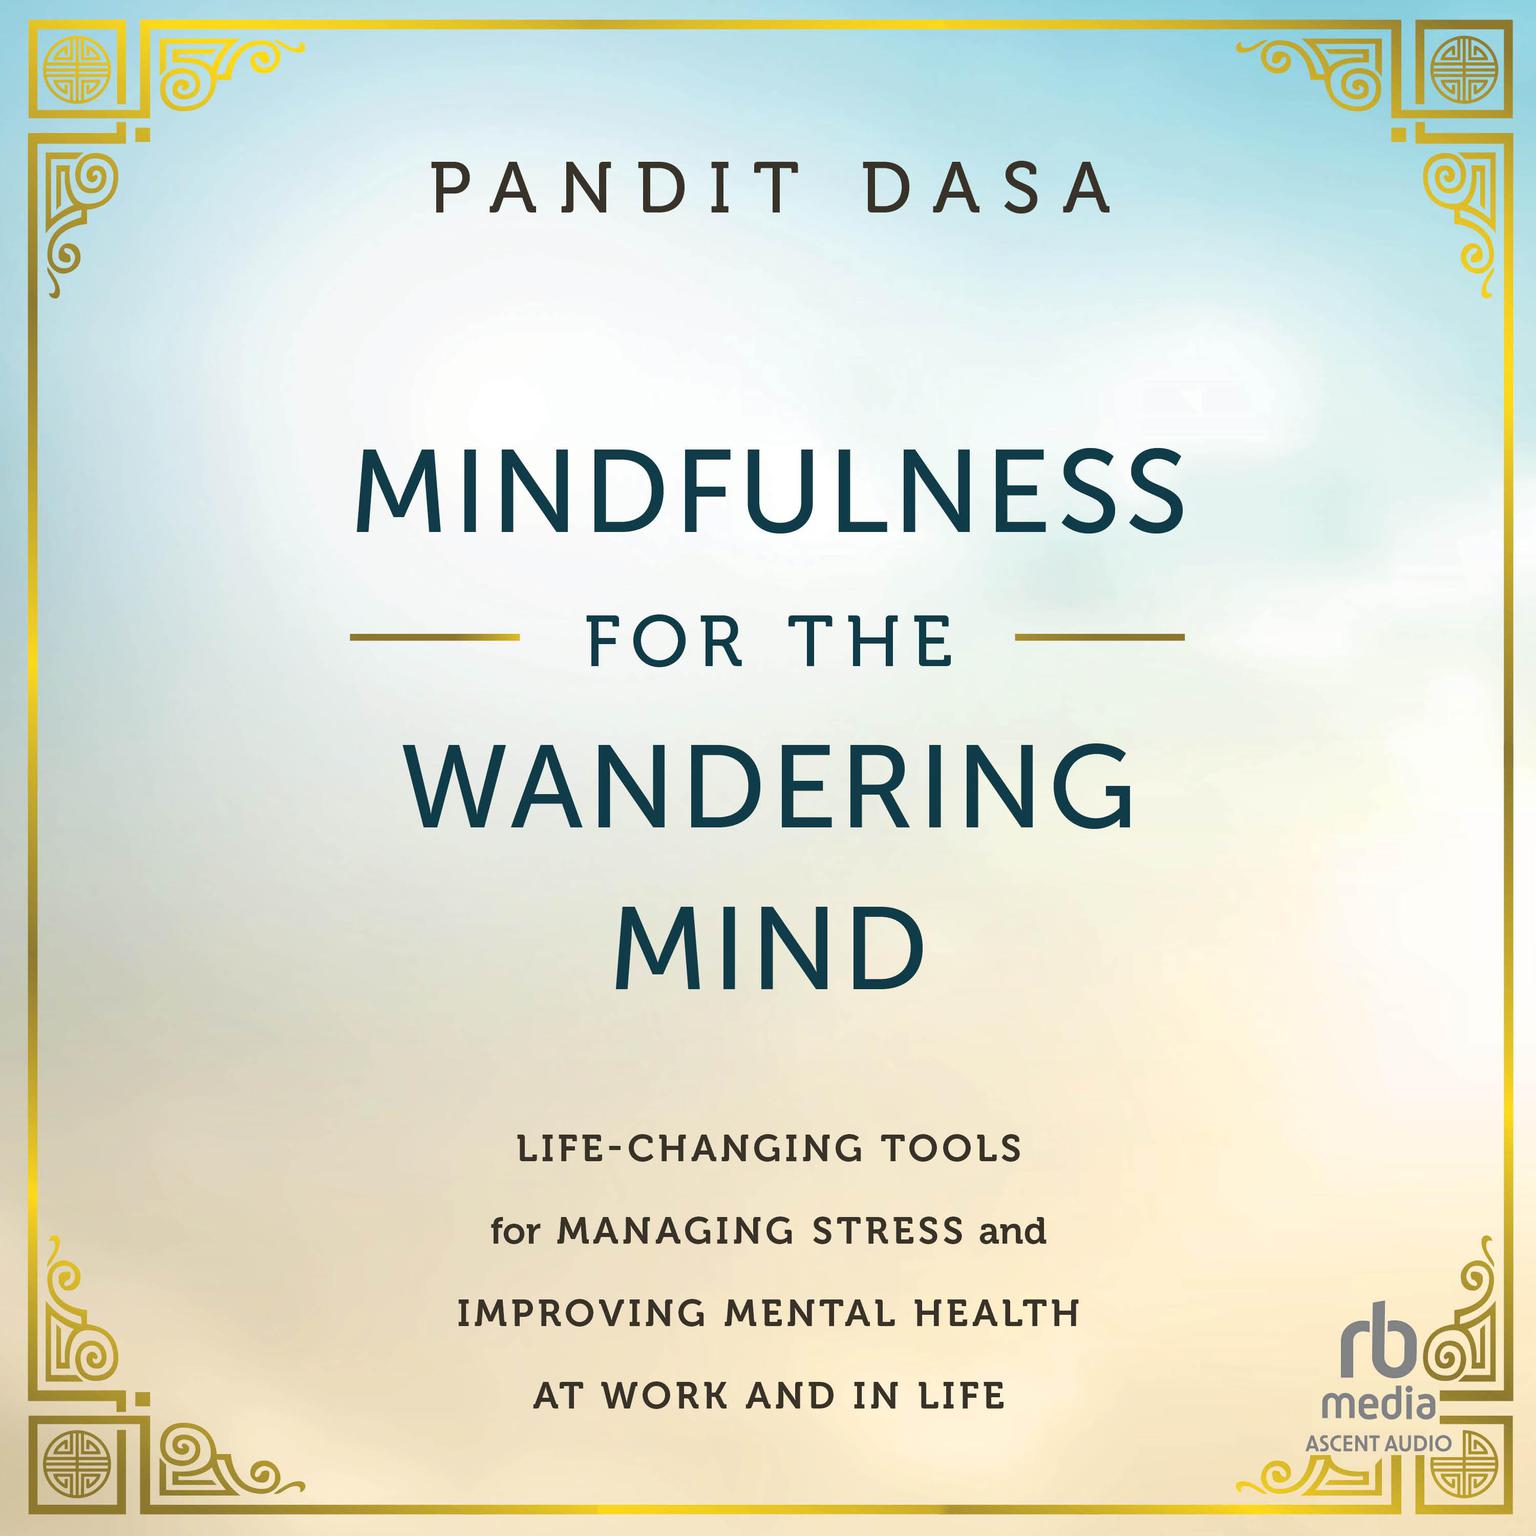 Mindfulness For the Wandering Mind: Life-Changing Tools for Managing Stress and Improving Mental Health At Work and In Life Audiobook, by Pandit Dasa